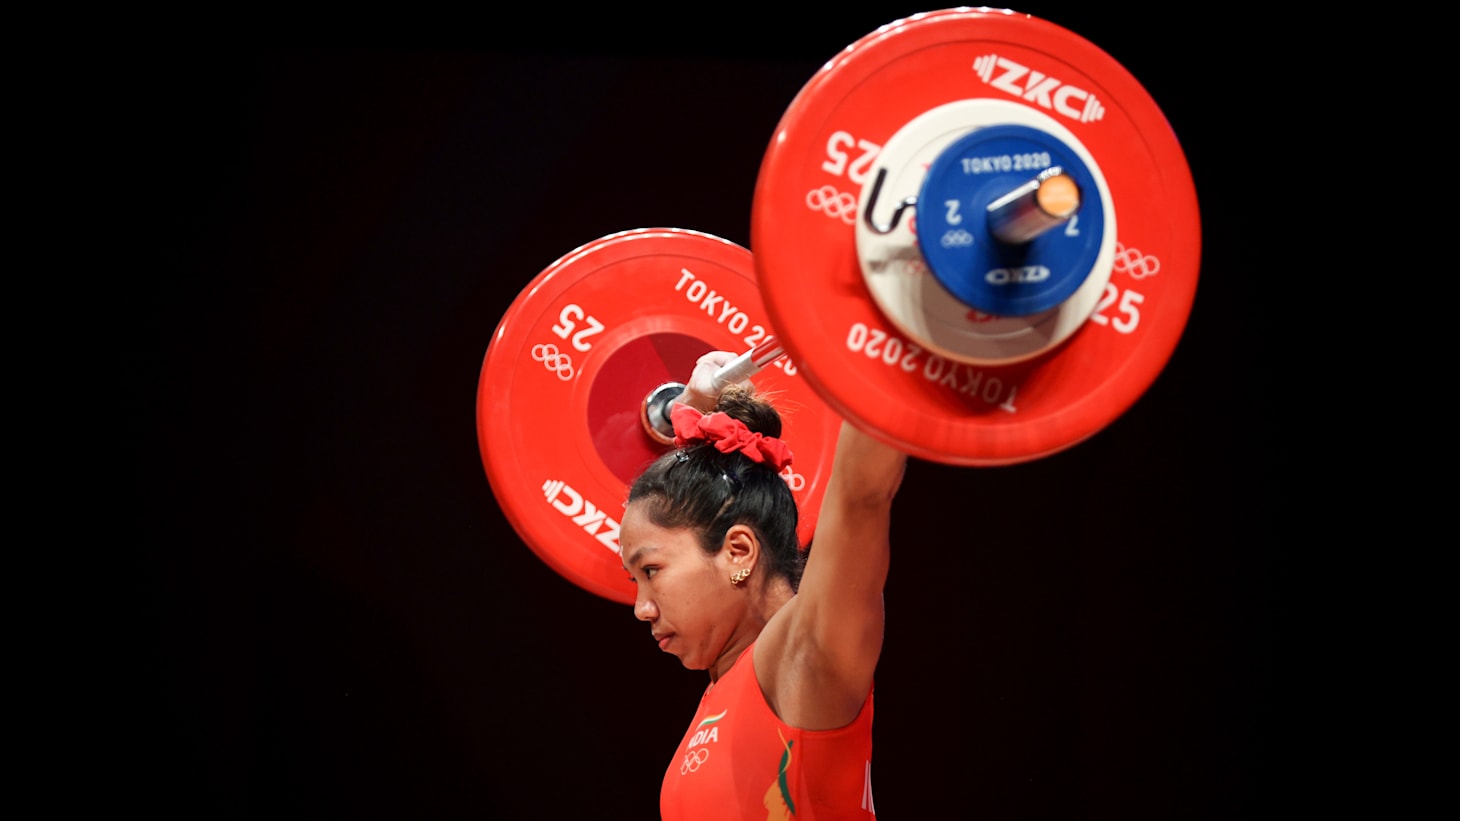 World Weightlifting Championships 2022 Get schedule and watch live streaming in India